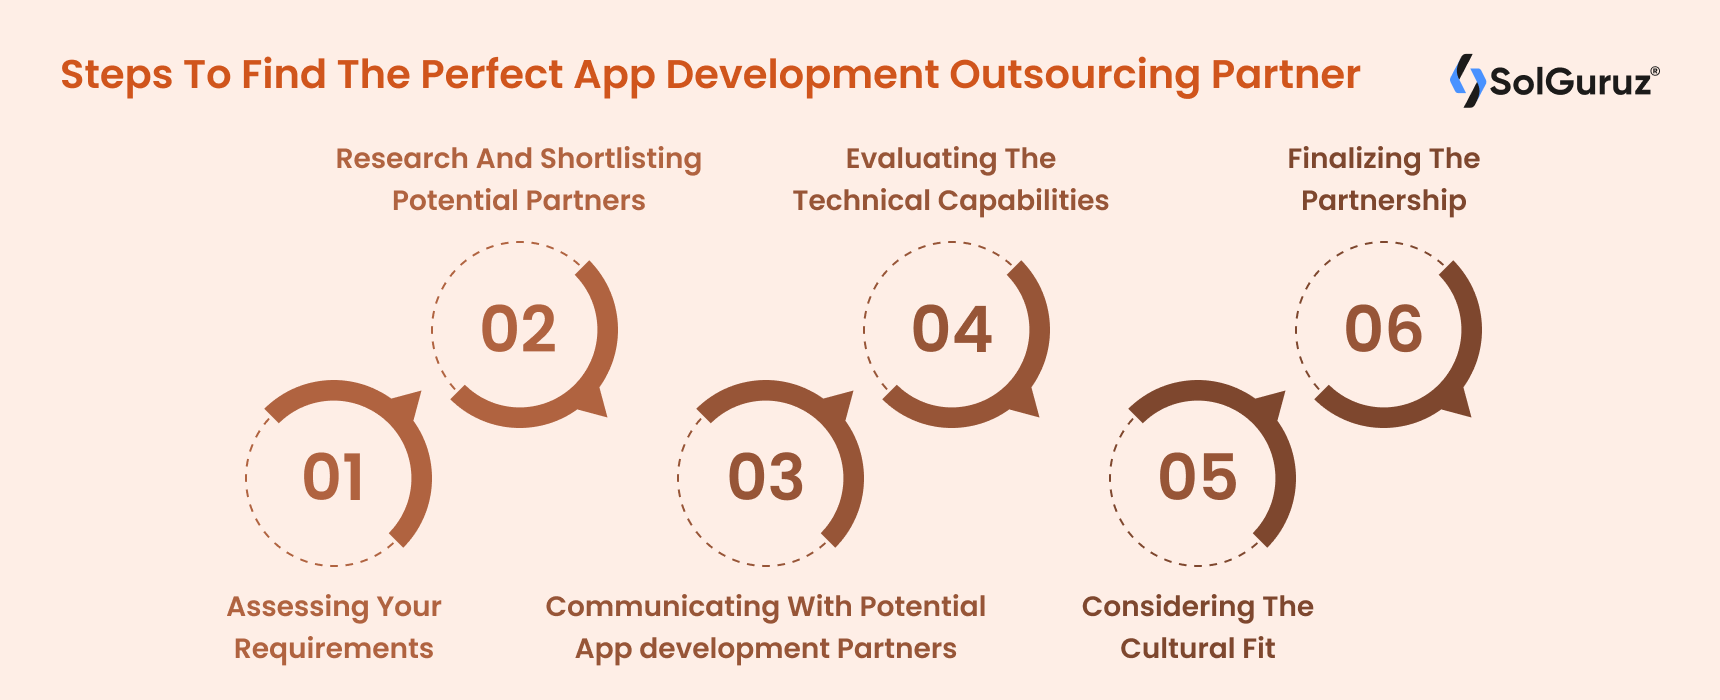 Steps To Find The Perfect App Development Outsourcing Partner